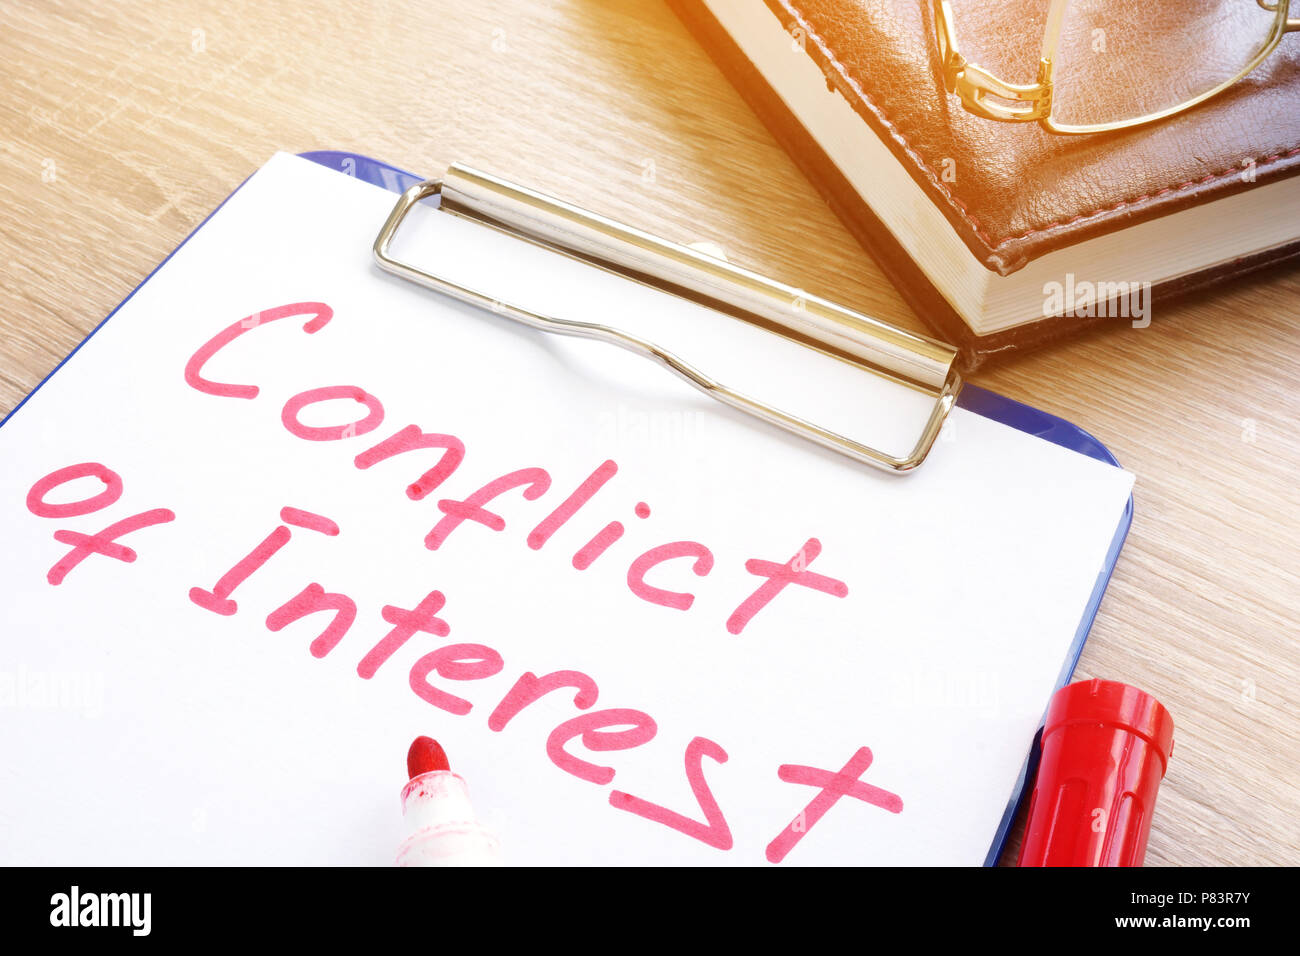 Conflict of interest written on a piece of paper. Stock Photo